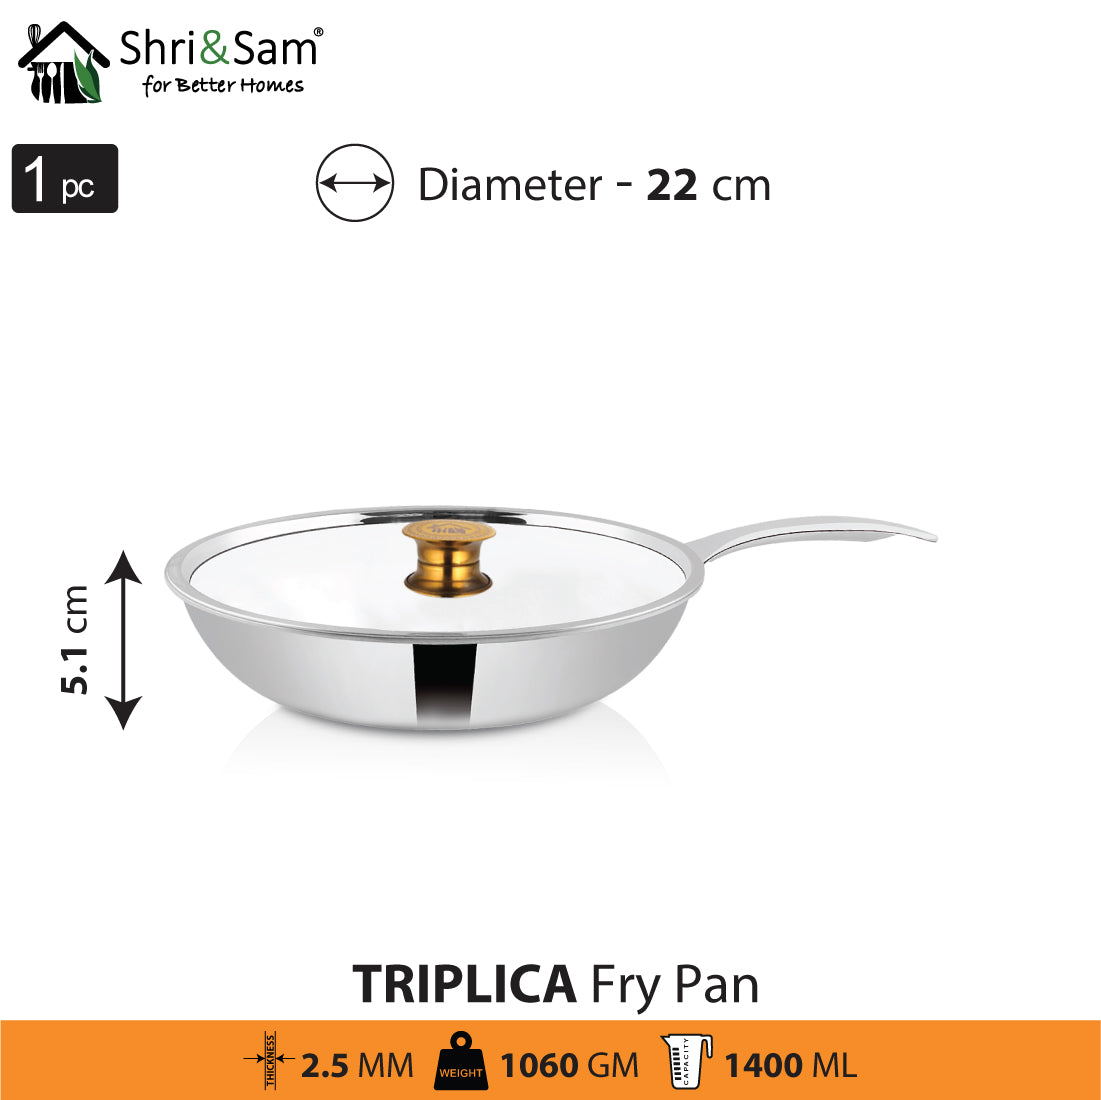 Stainless Steel Triply Fry Pan with SS Lid Triplica